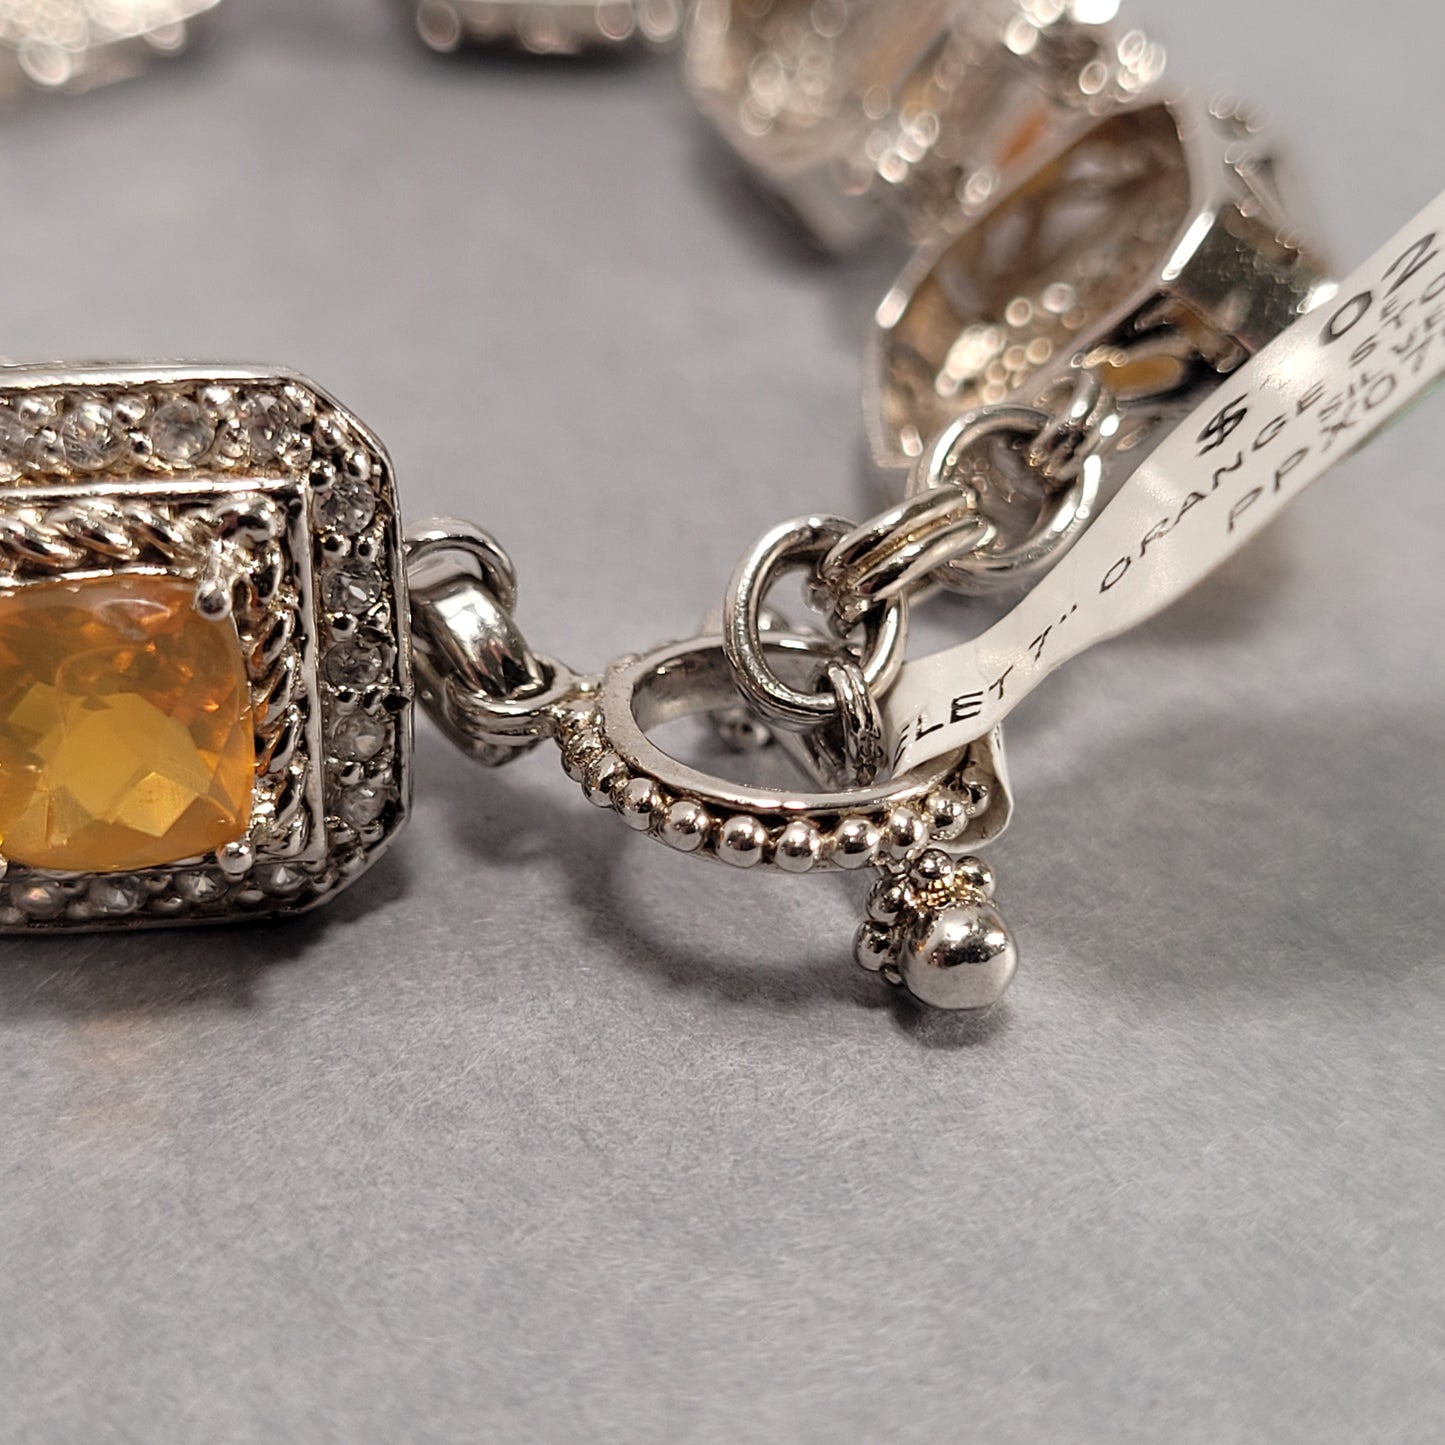 7" Sterling Silver Bracelet With Orange and Clear Stones 34g